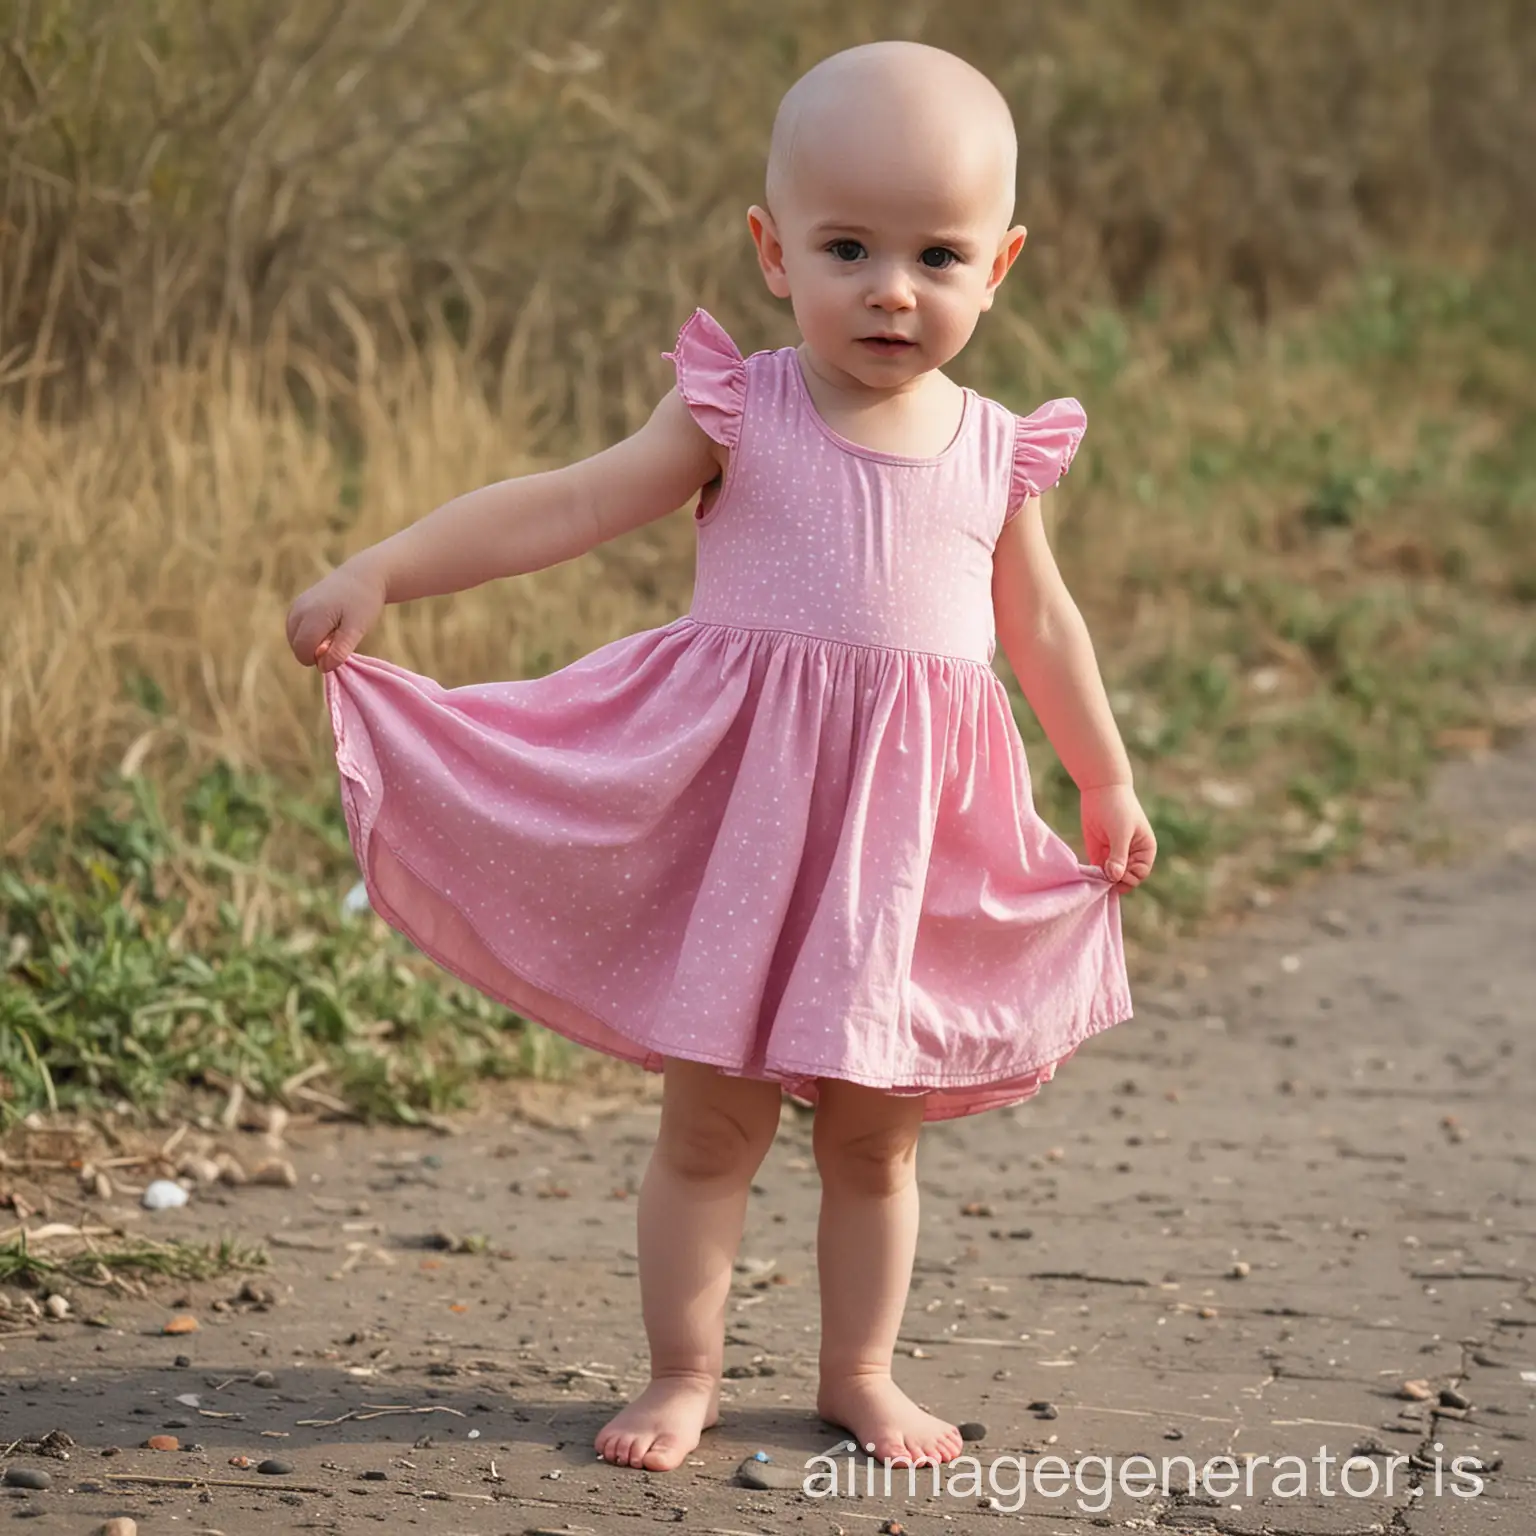 Adorable-Toddler-Girl-in-Pink-Dress-Standing-Barefoot